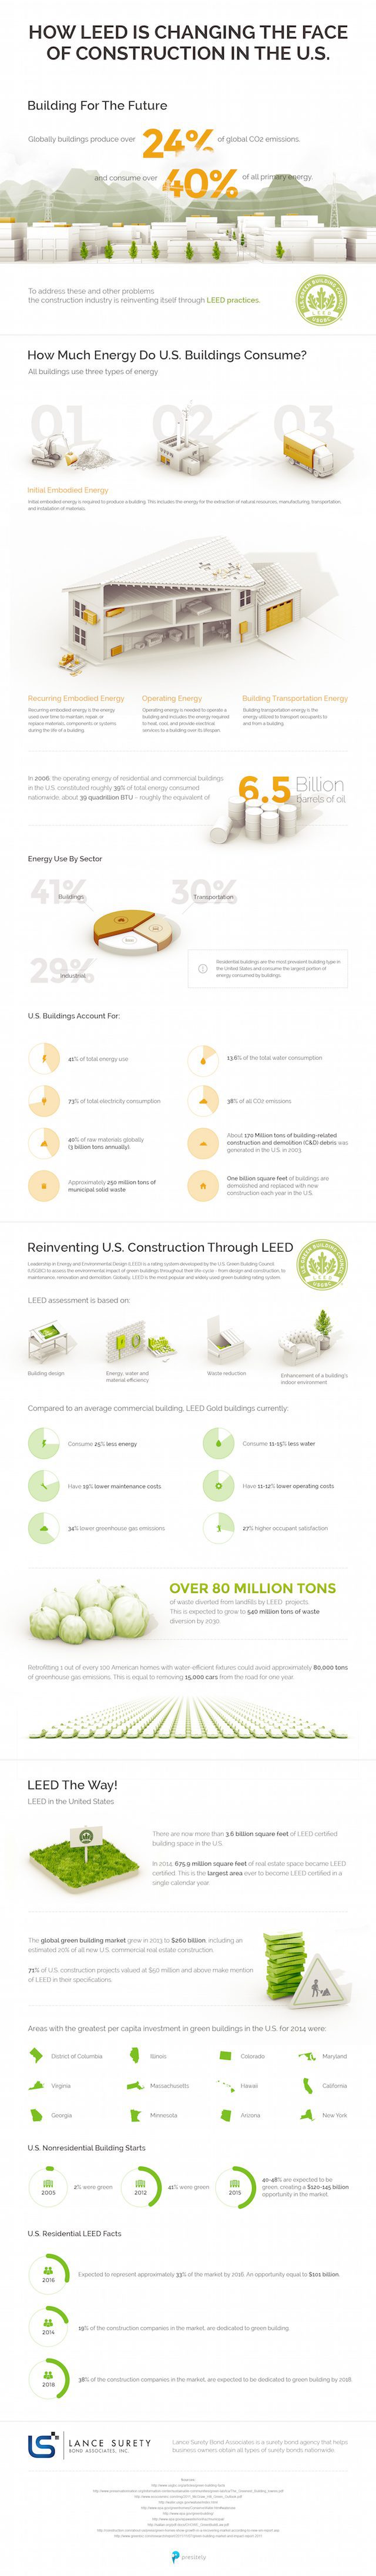 LEED construction helps create a more sustainable built environment 